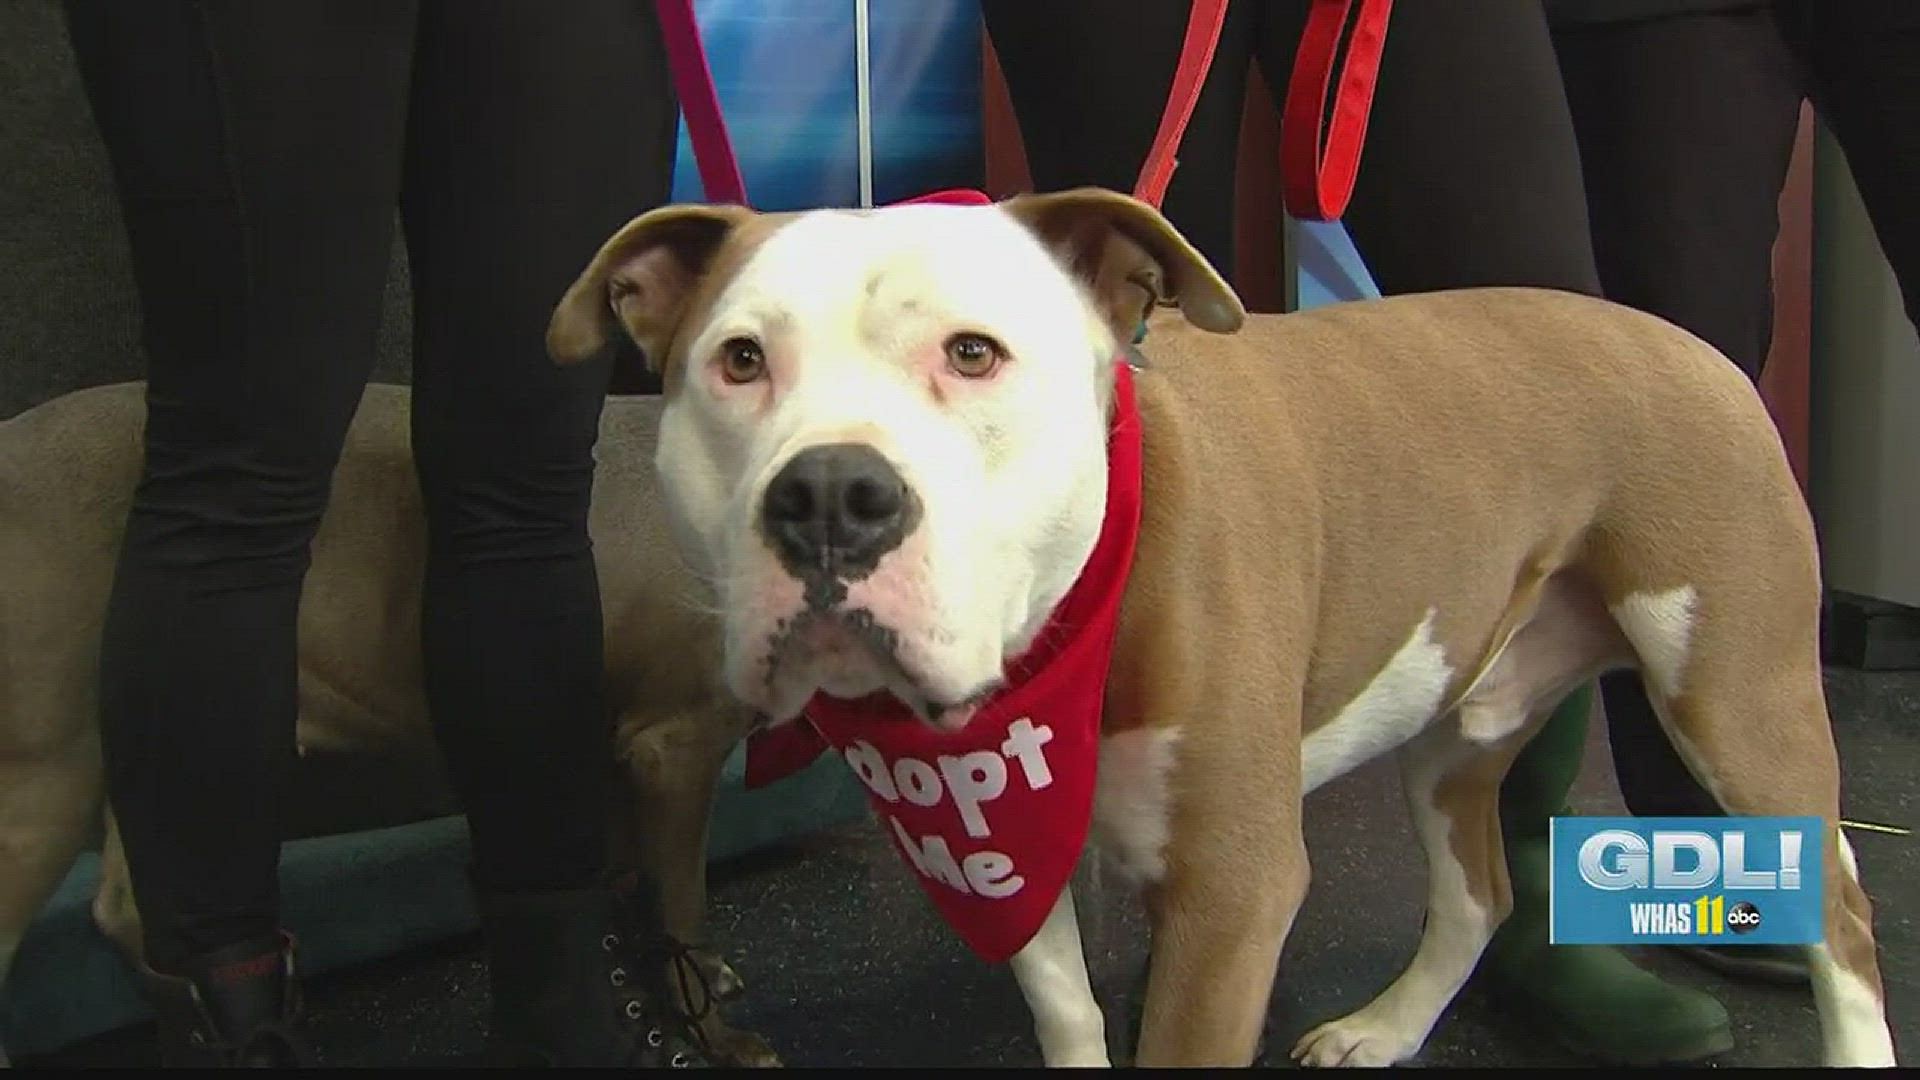 Bo and Bella are local pit bulls who are looking for their forever home after their owner tragically passed.